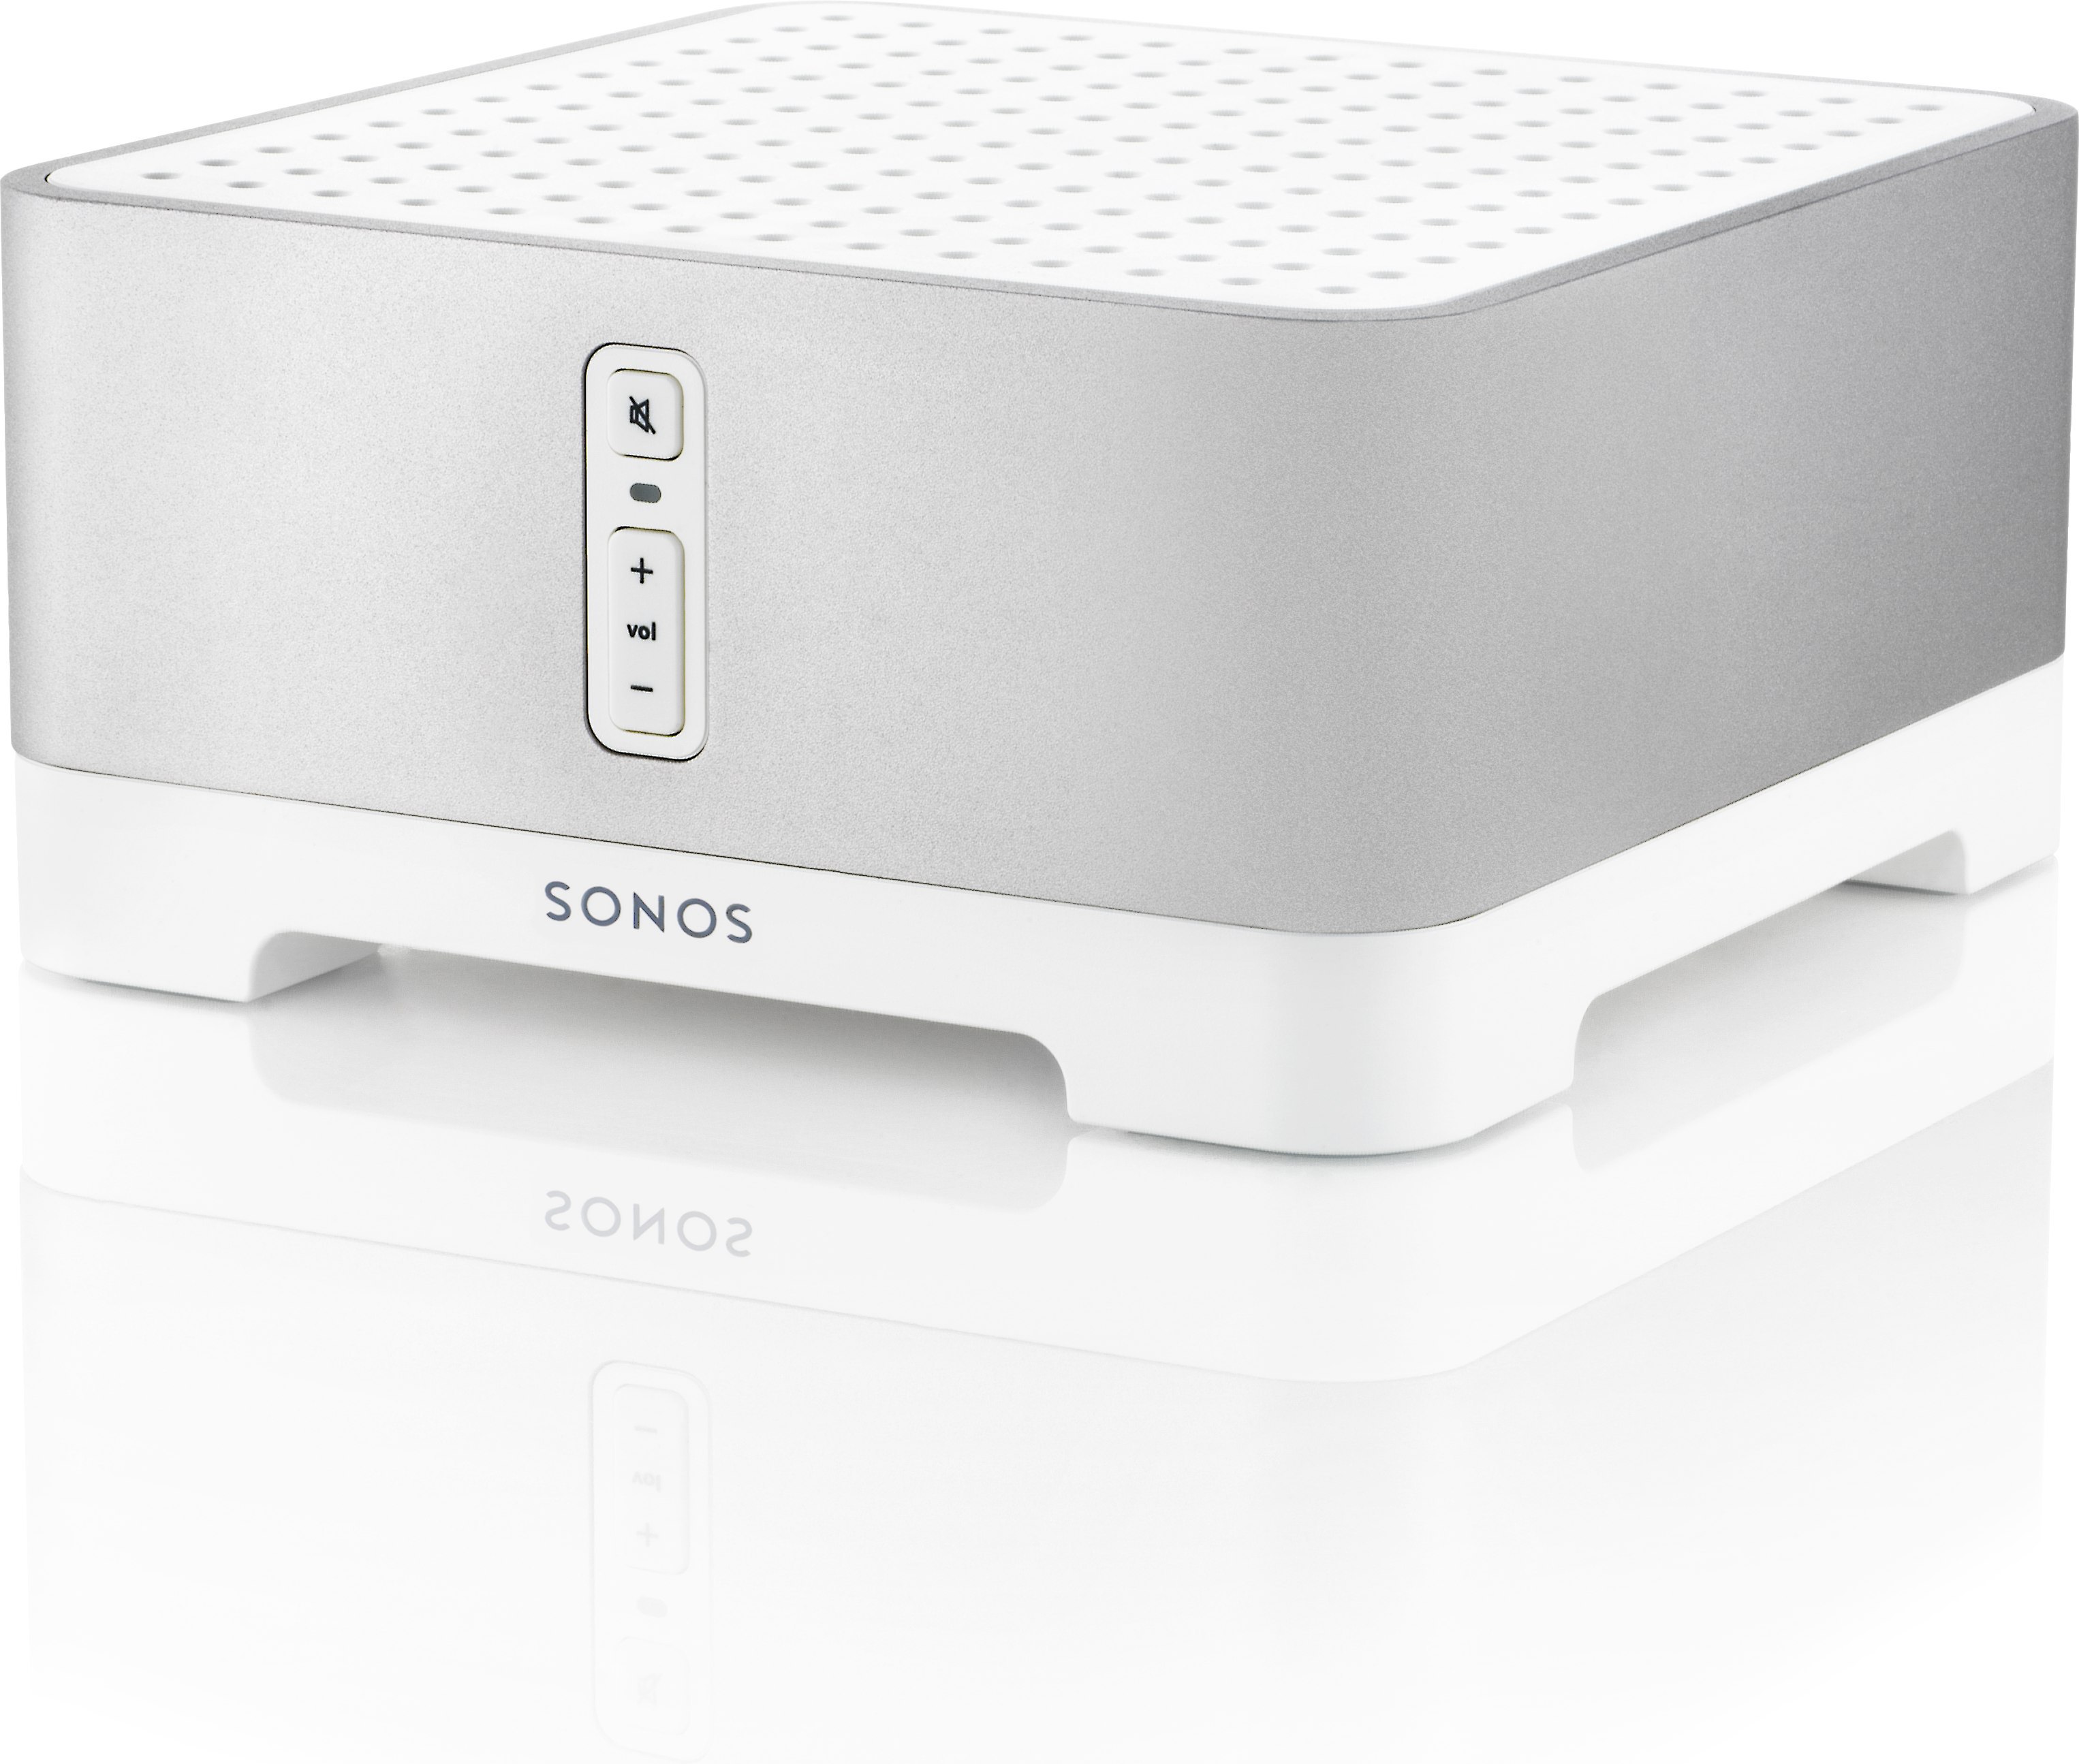 Customer Reviews: Sonos Amplified music system for home at Crutchfield